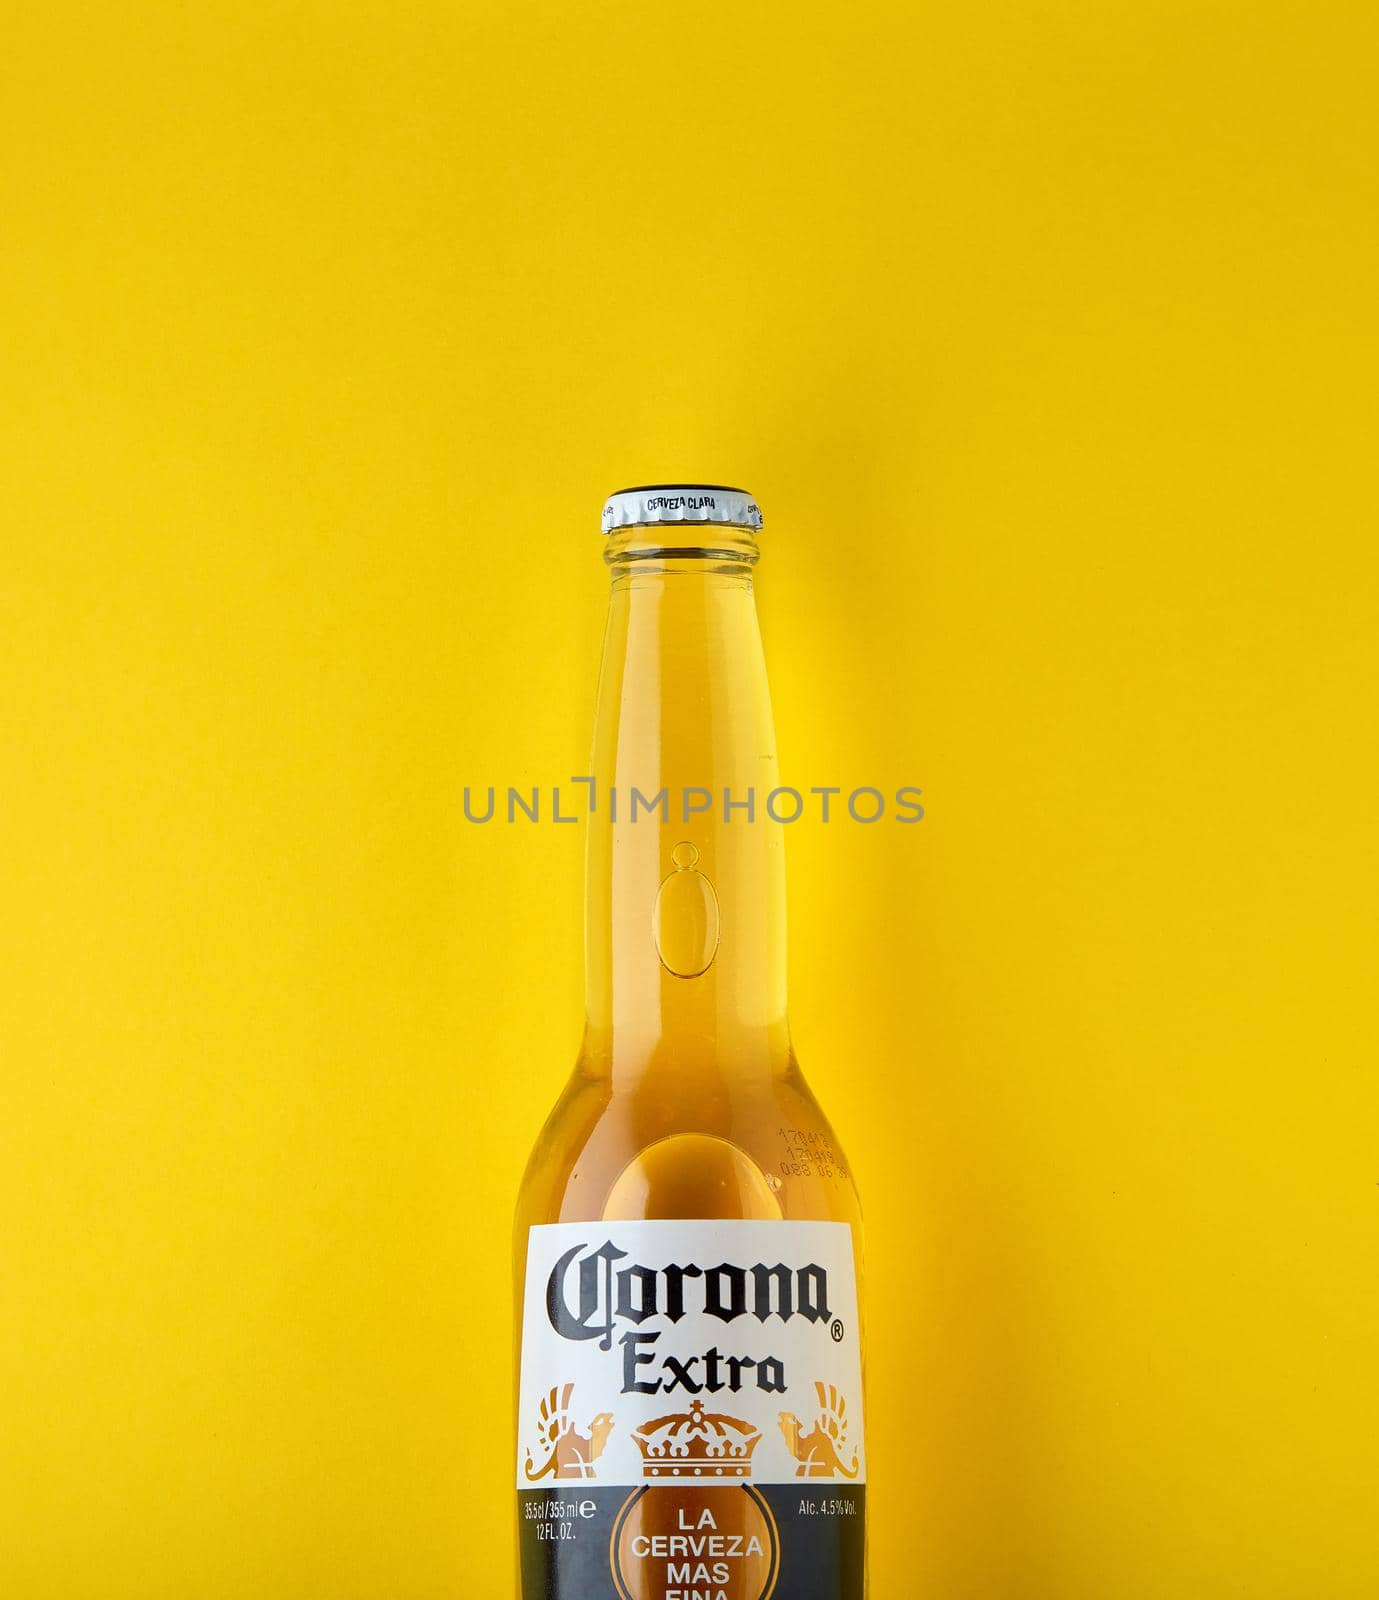 Bottle of Corona Extra Beer. On yellow background. Corona is made in Mexico and is the top selling imported beer in the United States. 13.03.2020, Russia. by EvgeniyQW